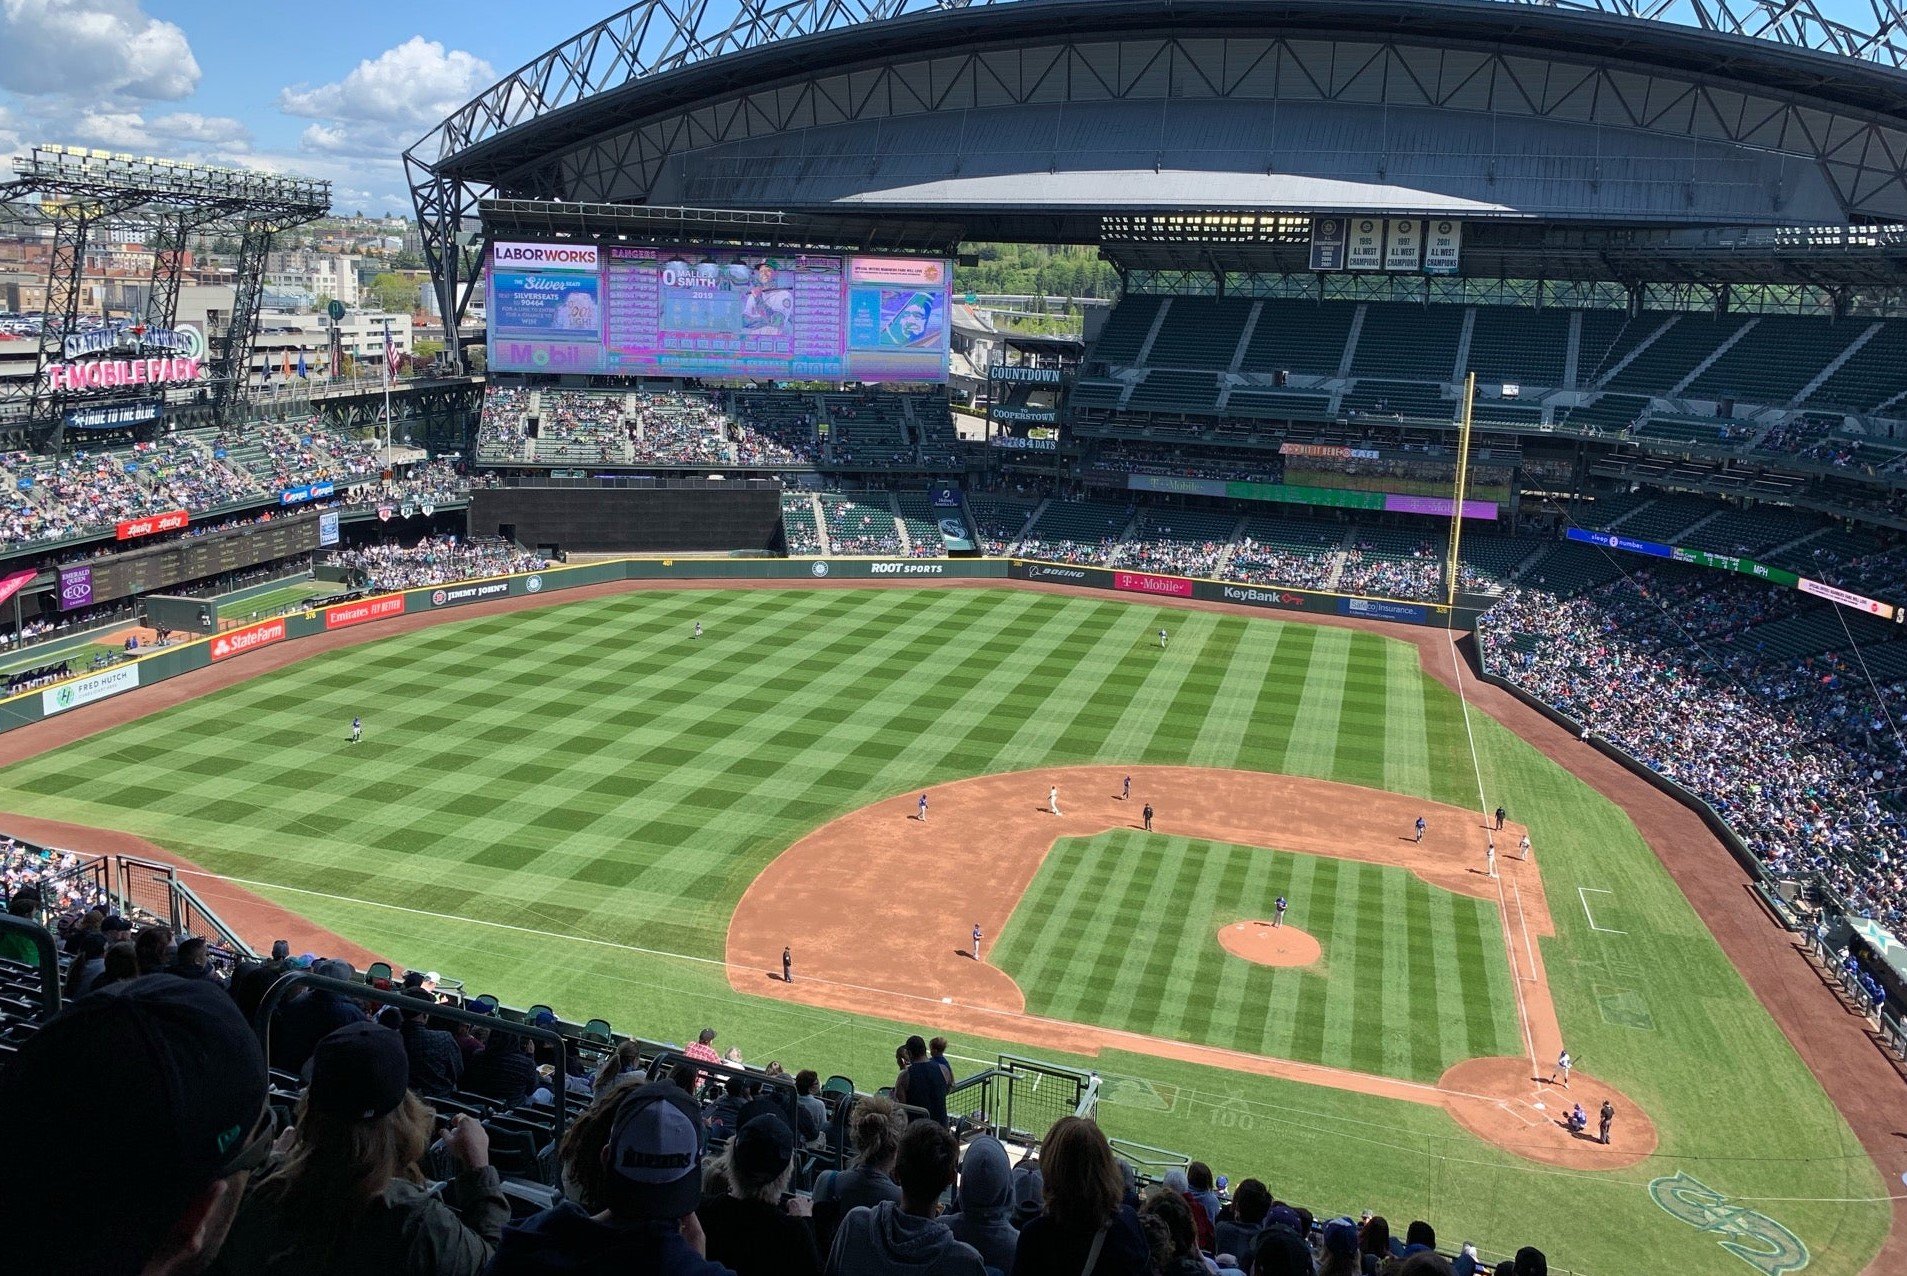 cheap seats in shade mariners game